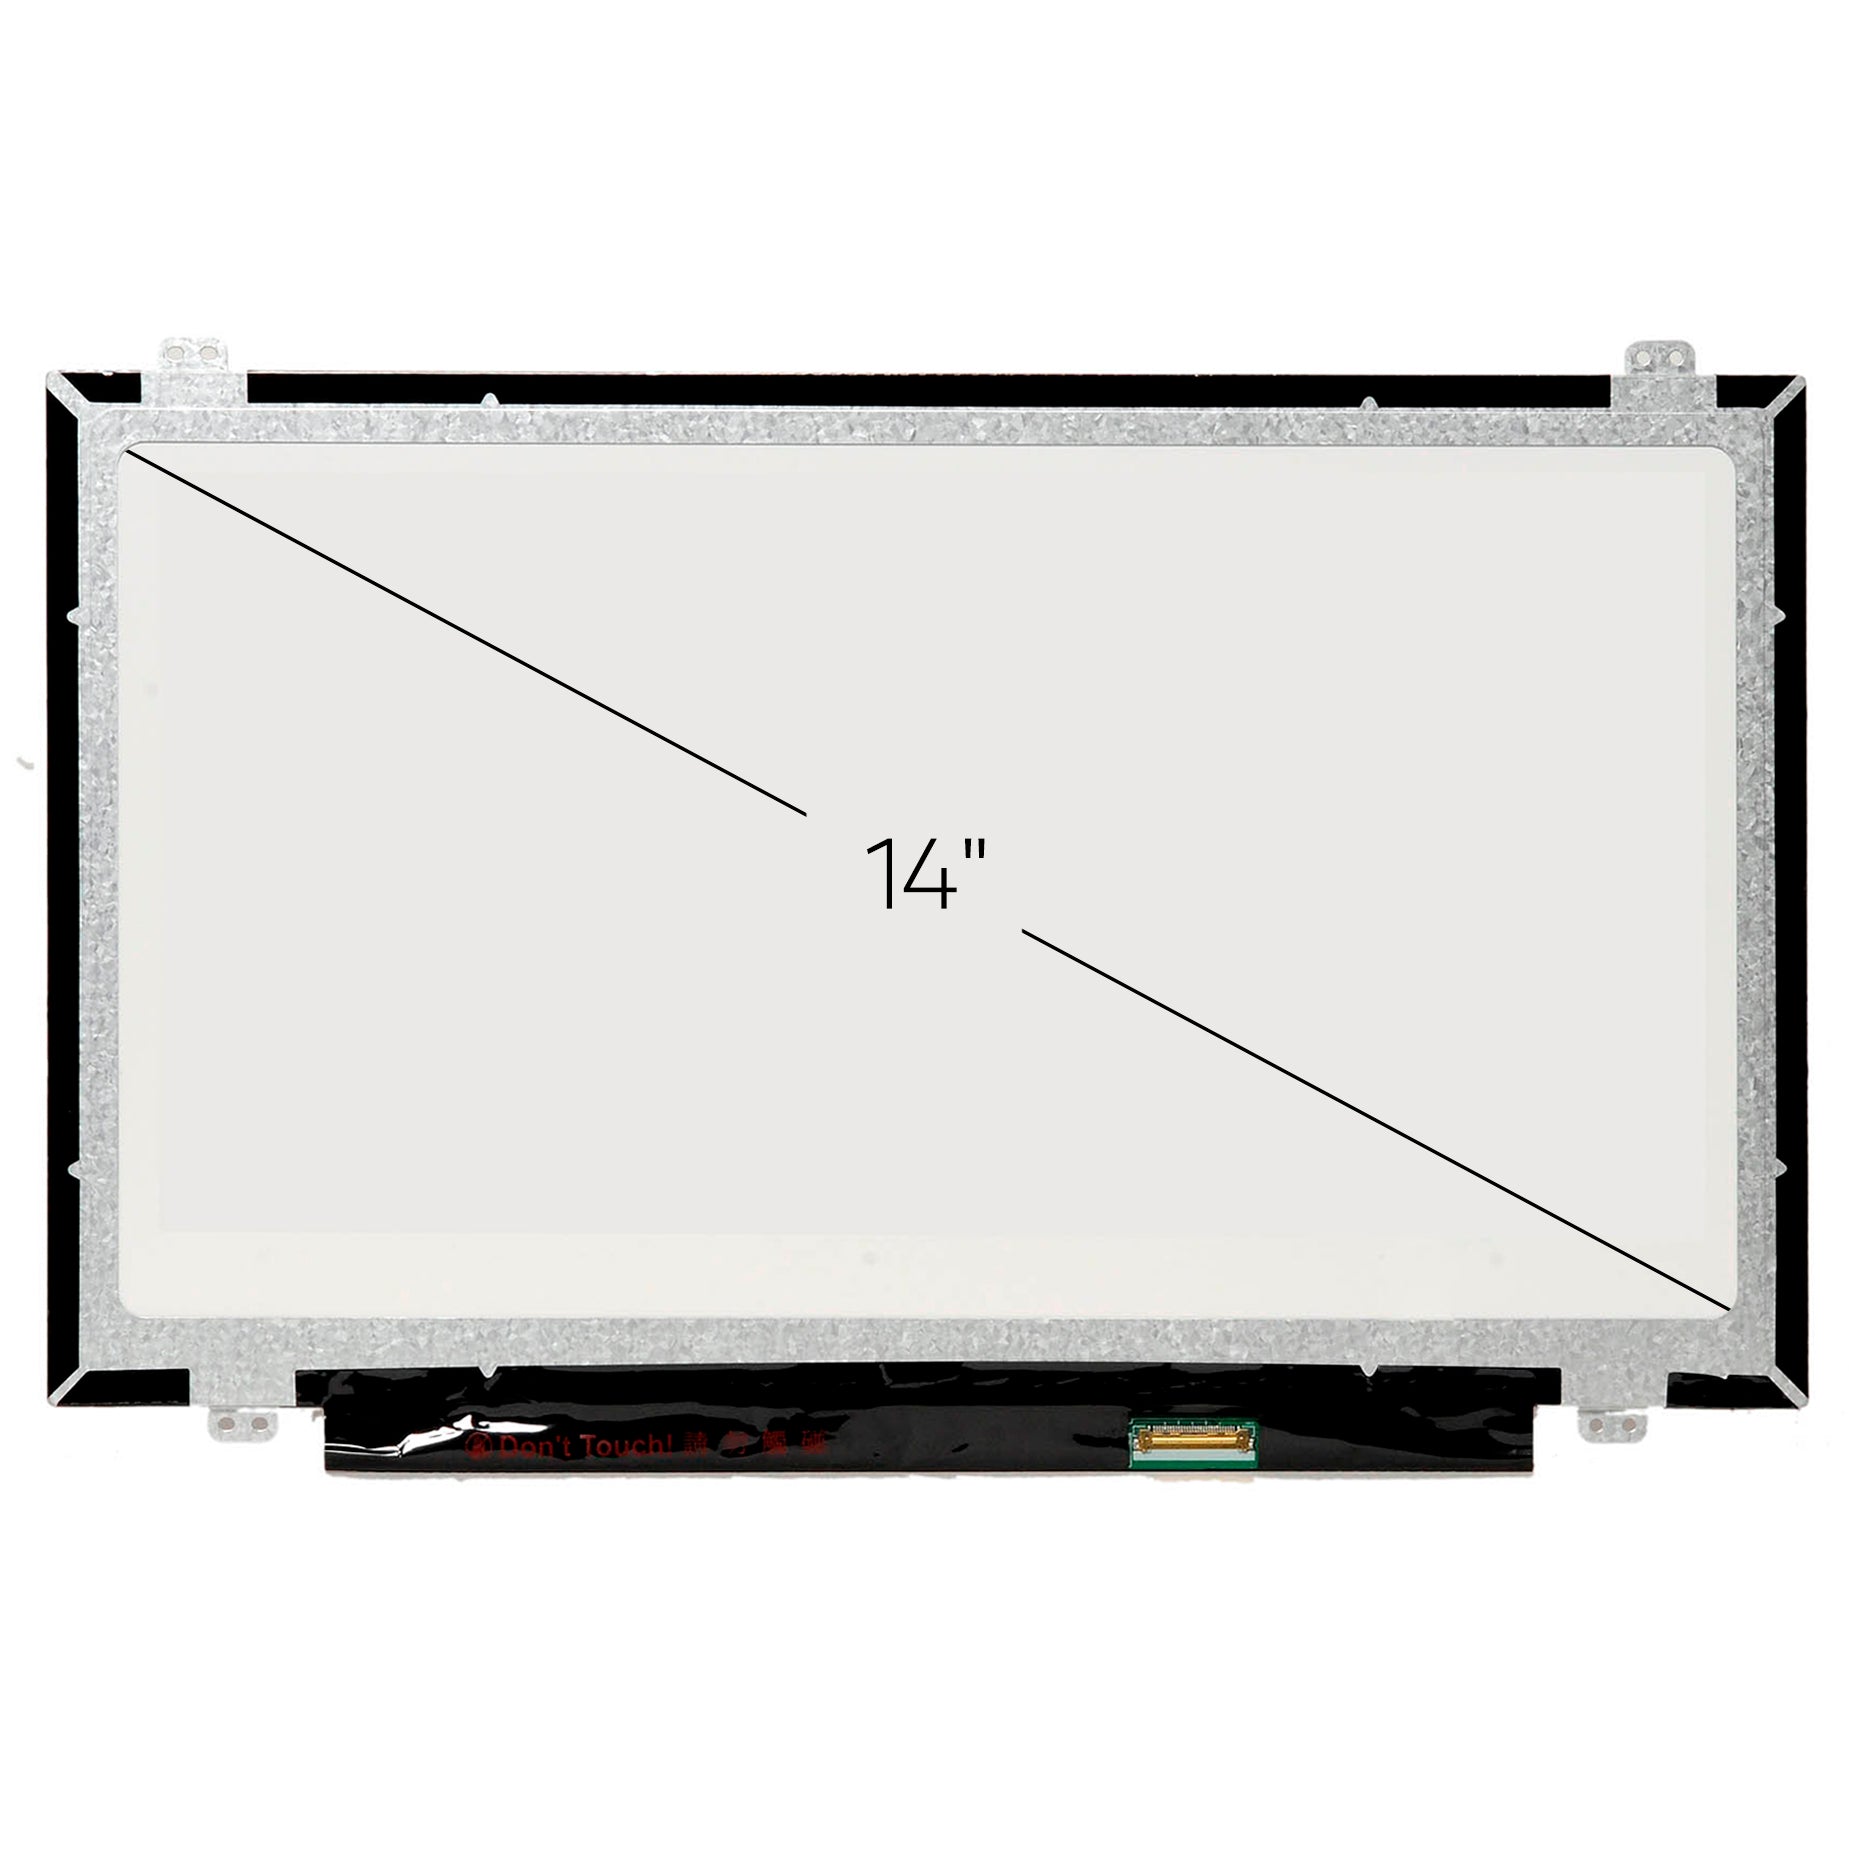 Screen Replacement for HP Stream 14-AX060NR 2NV76UA HD 1366x768 Glossy LCD LED Display